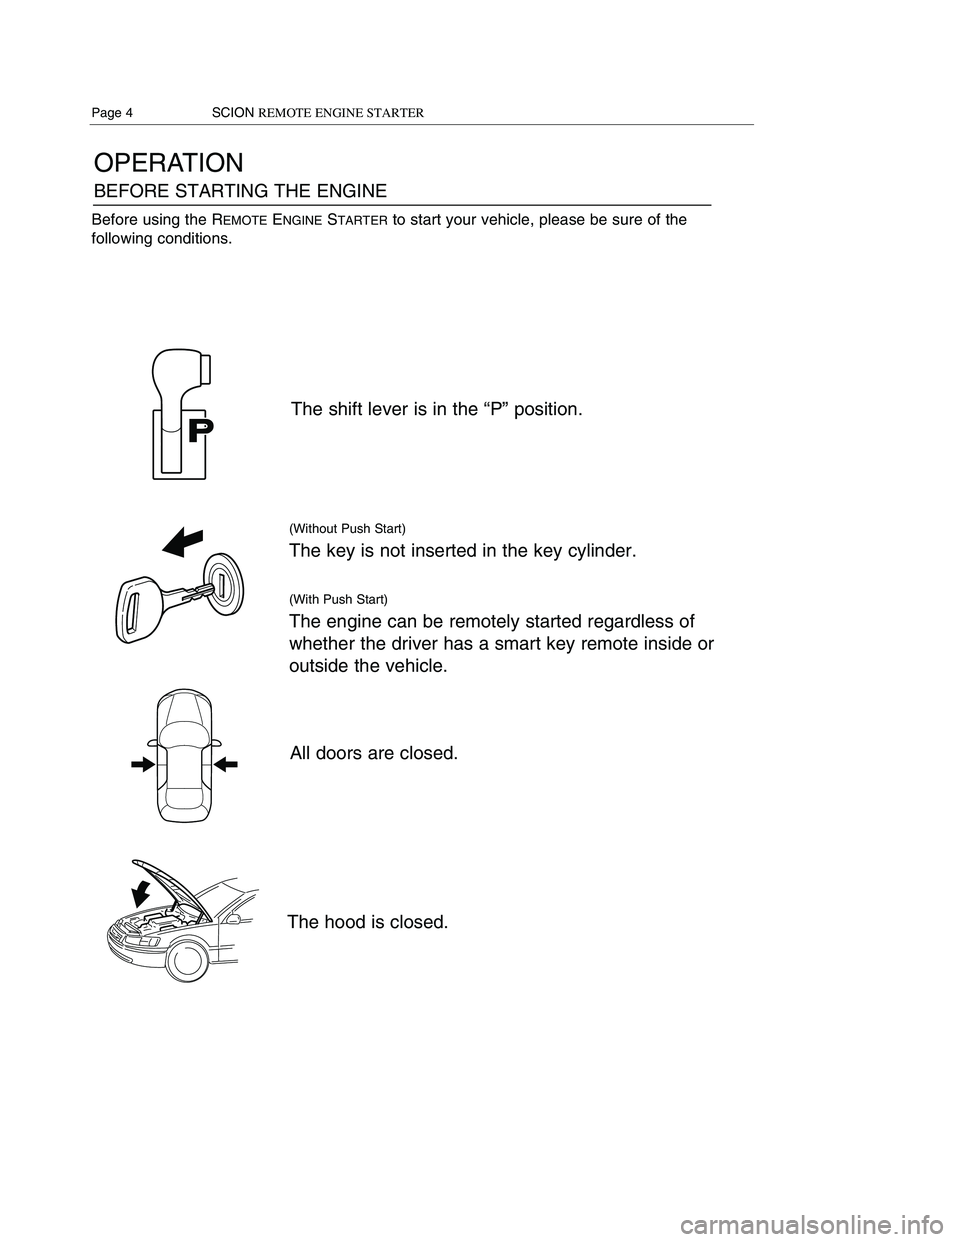 TOYOTA xD 2014  Accessories, Audio & Navigation (in English) 
OPERATION
BEFORE STARTING THE ENGINE
The shift lever is in the “P” position.
(Without Push Start)
The key is not inserted in the key cylinder.
(With Push Start)
The engine can be remotely started